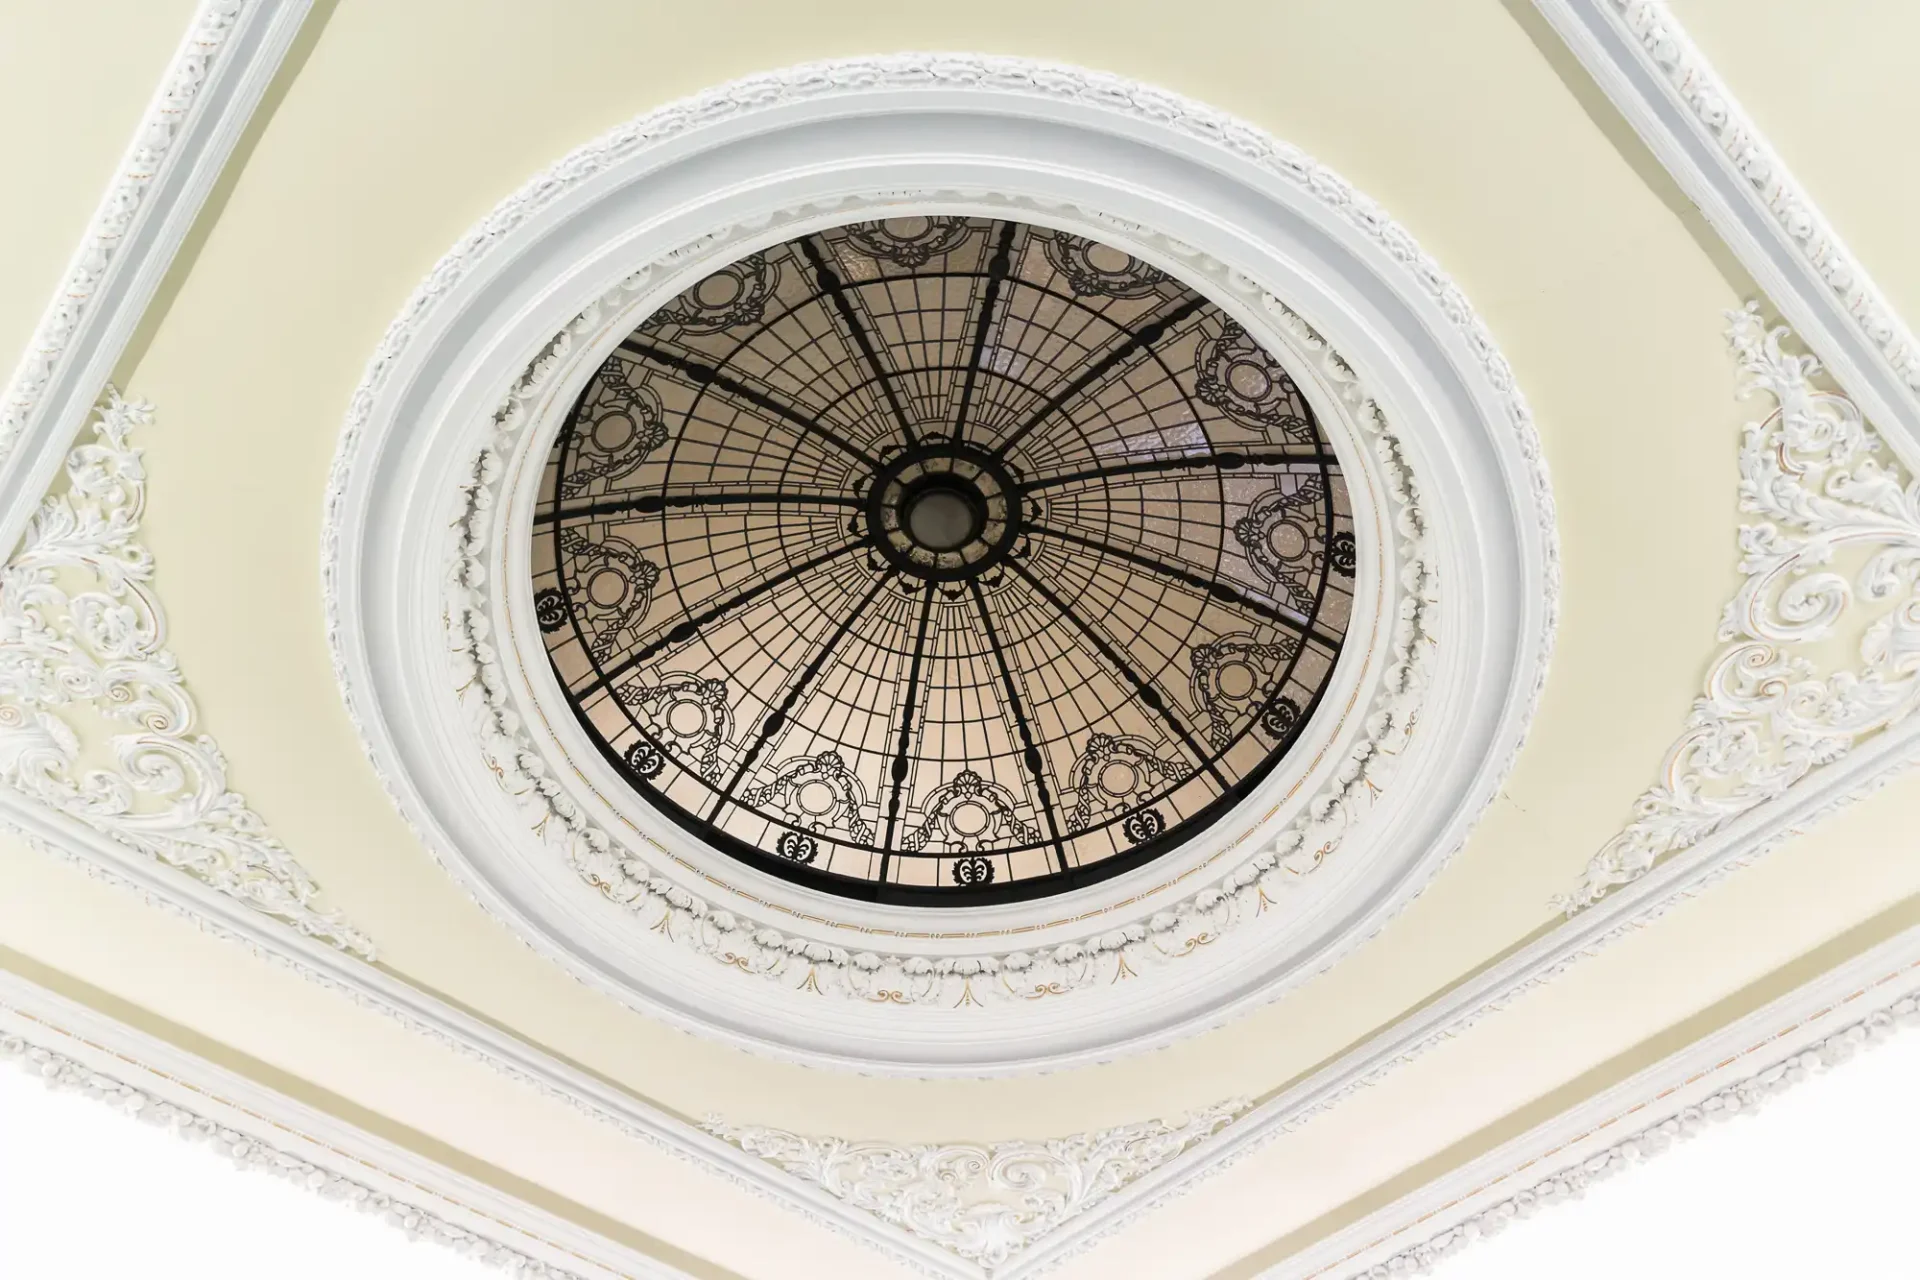 Ornate domed skylight with intricate metal framework set in an elaborately detailed white ceiling.